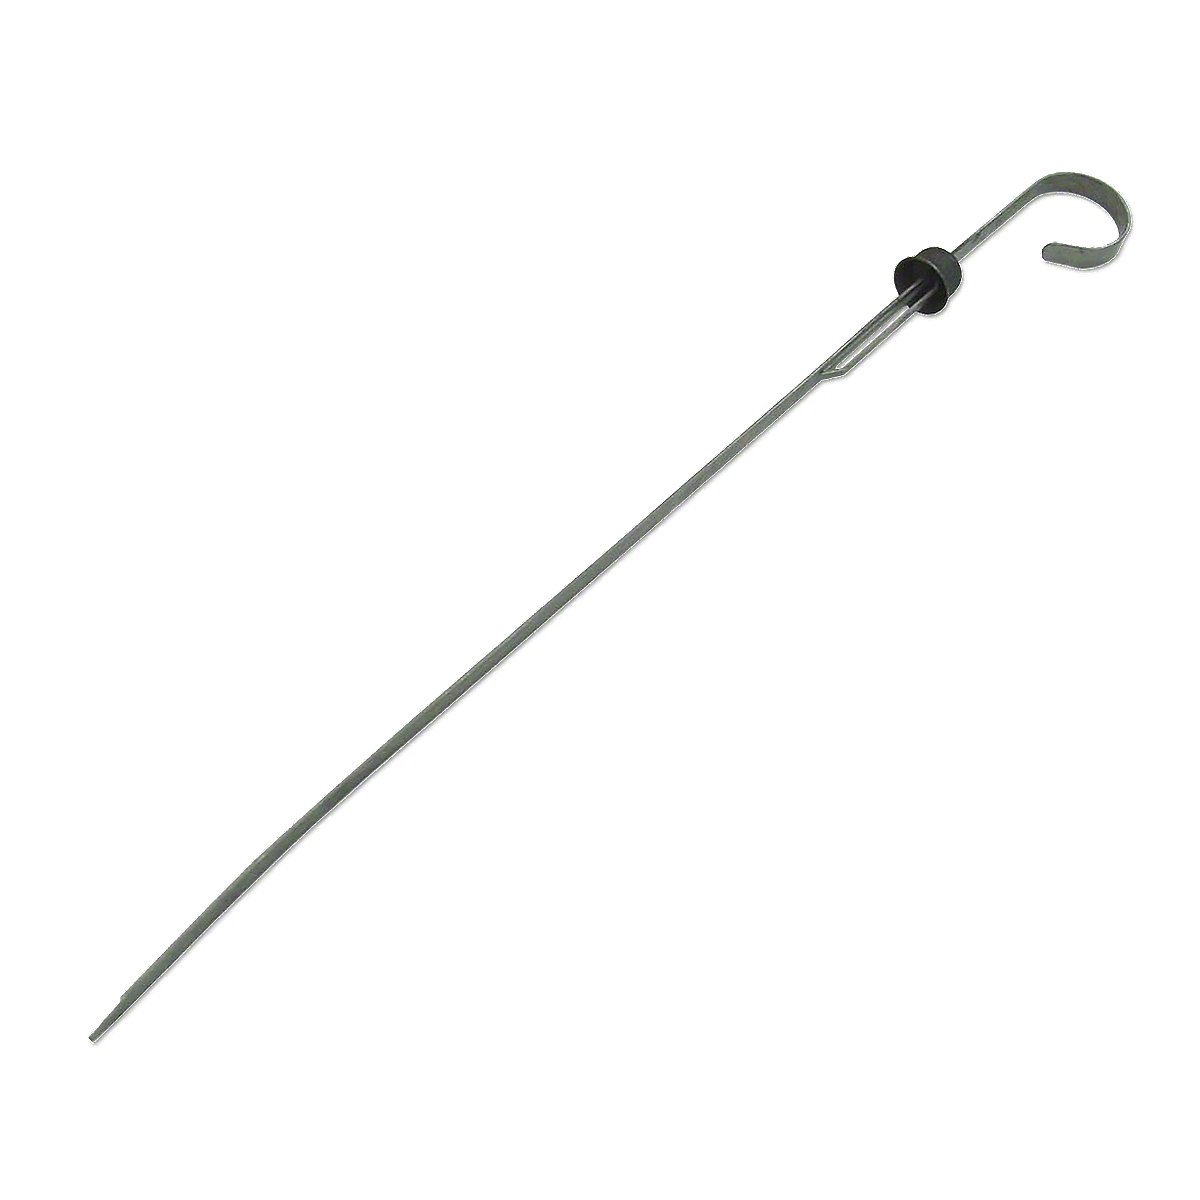 Alexander's Tractor Parts: B2NN6750A OIL DIPSTICK fits FORD Tractors